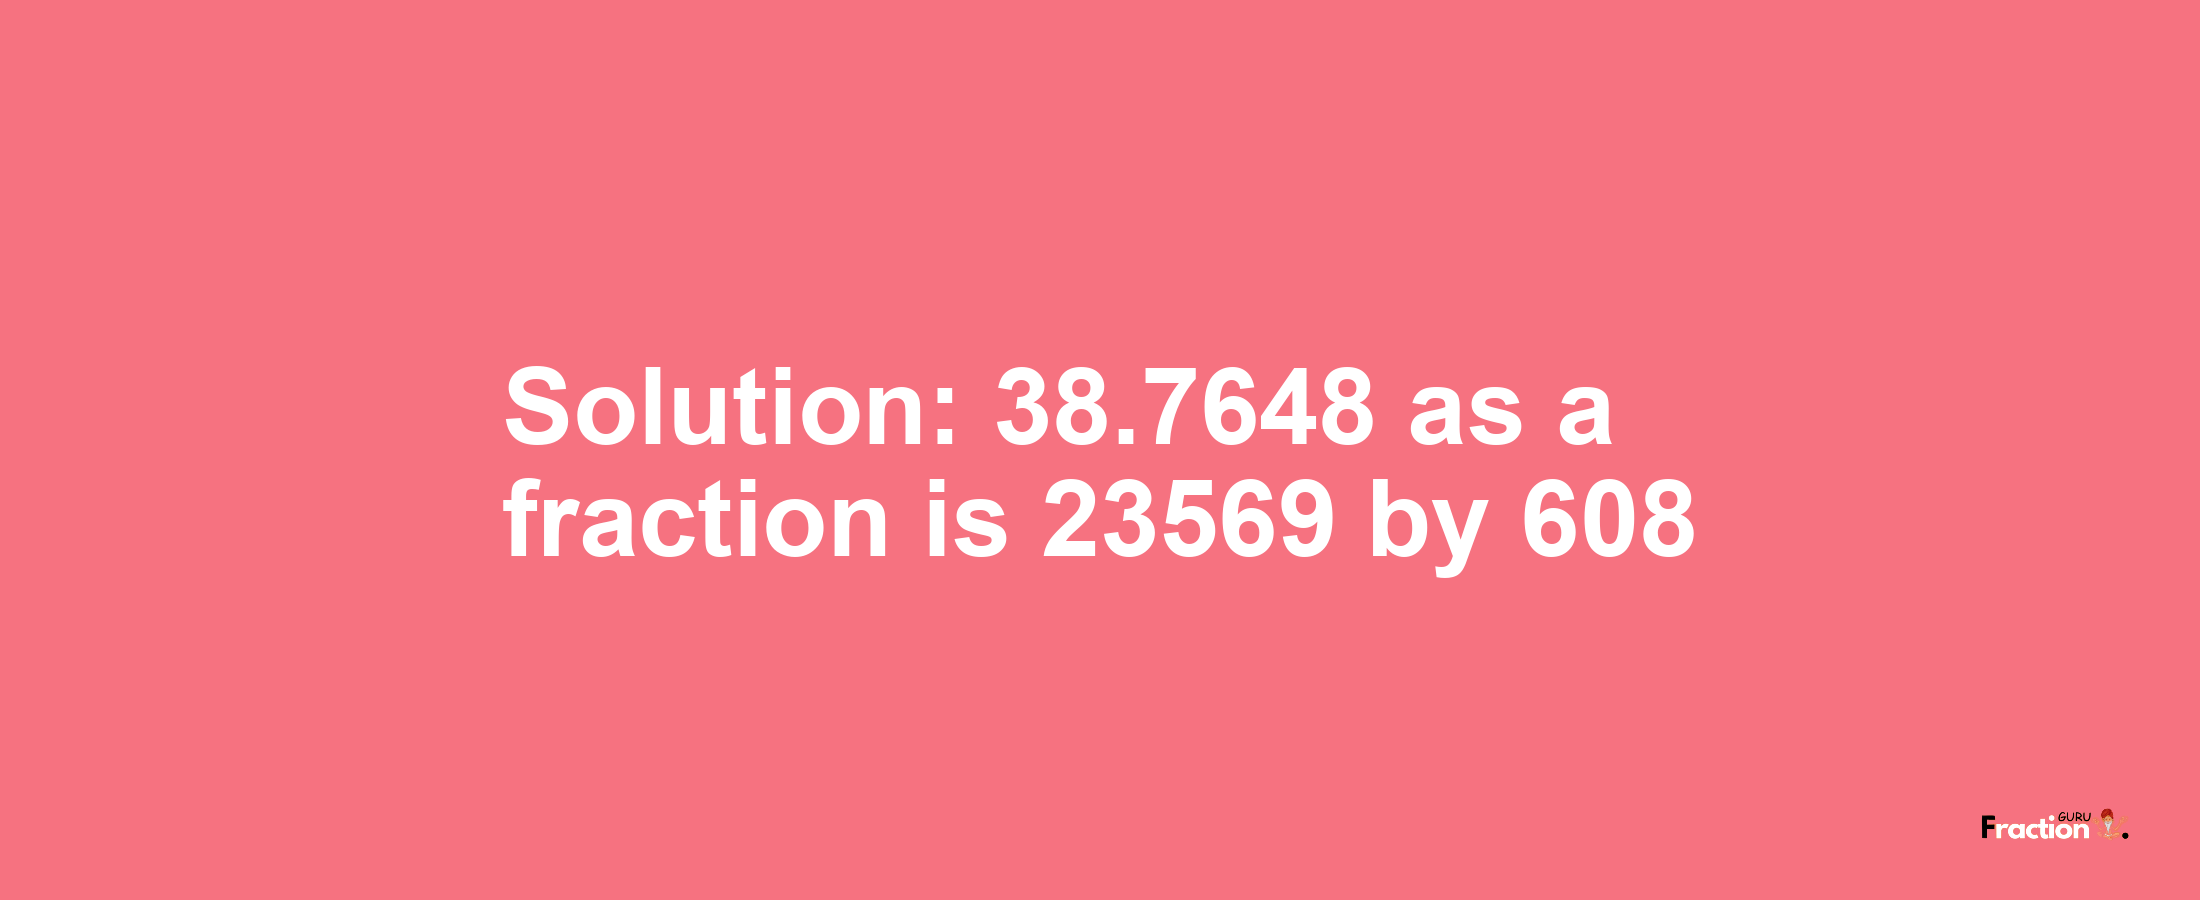 Solution:38.7648 as a fraction is 23569/608